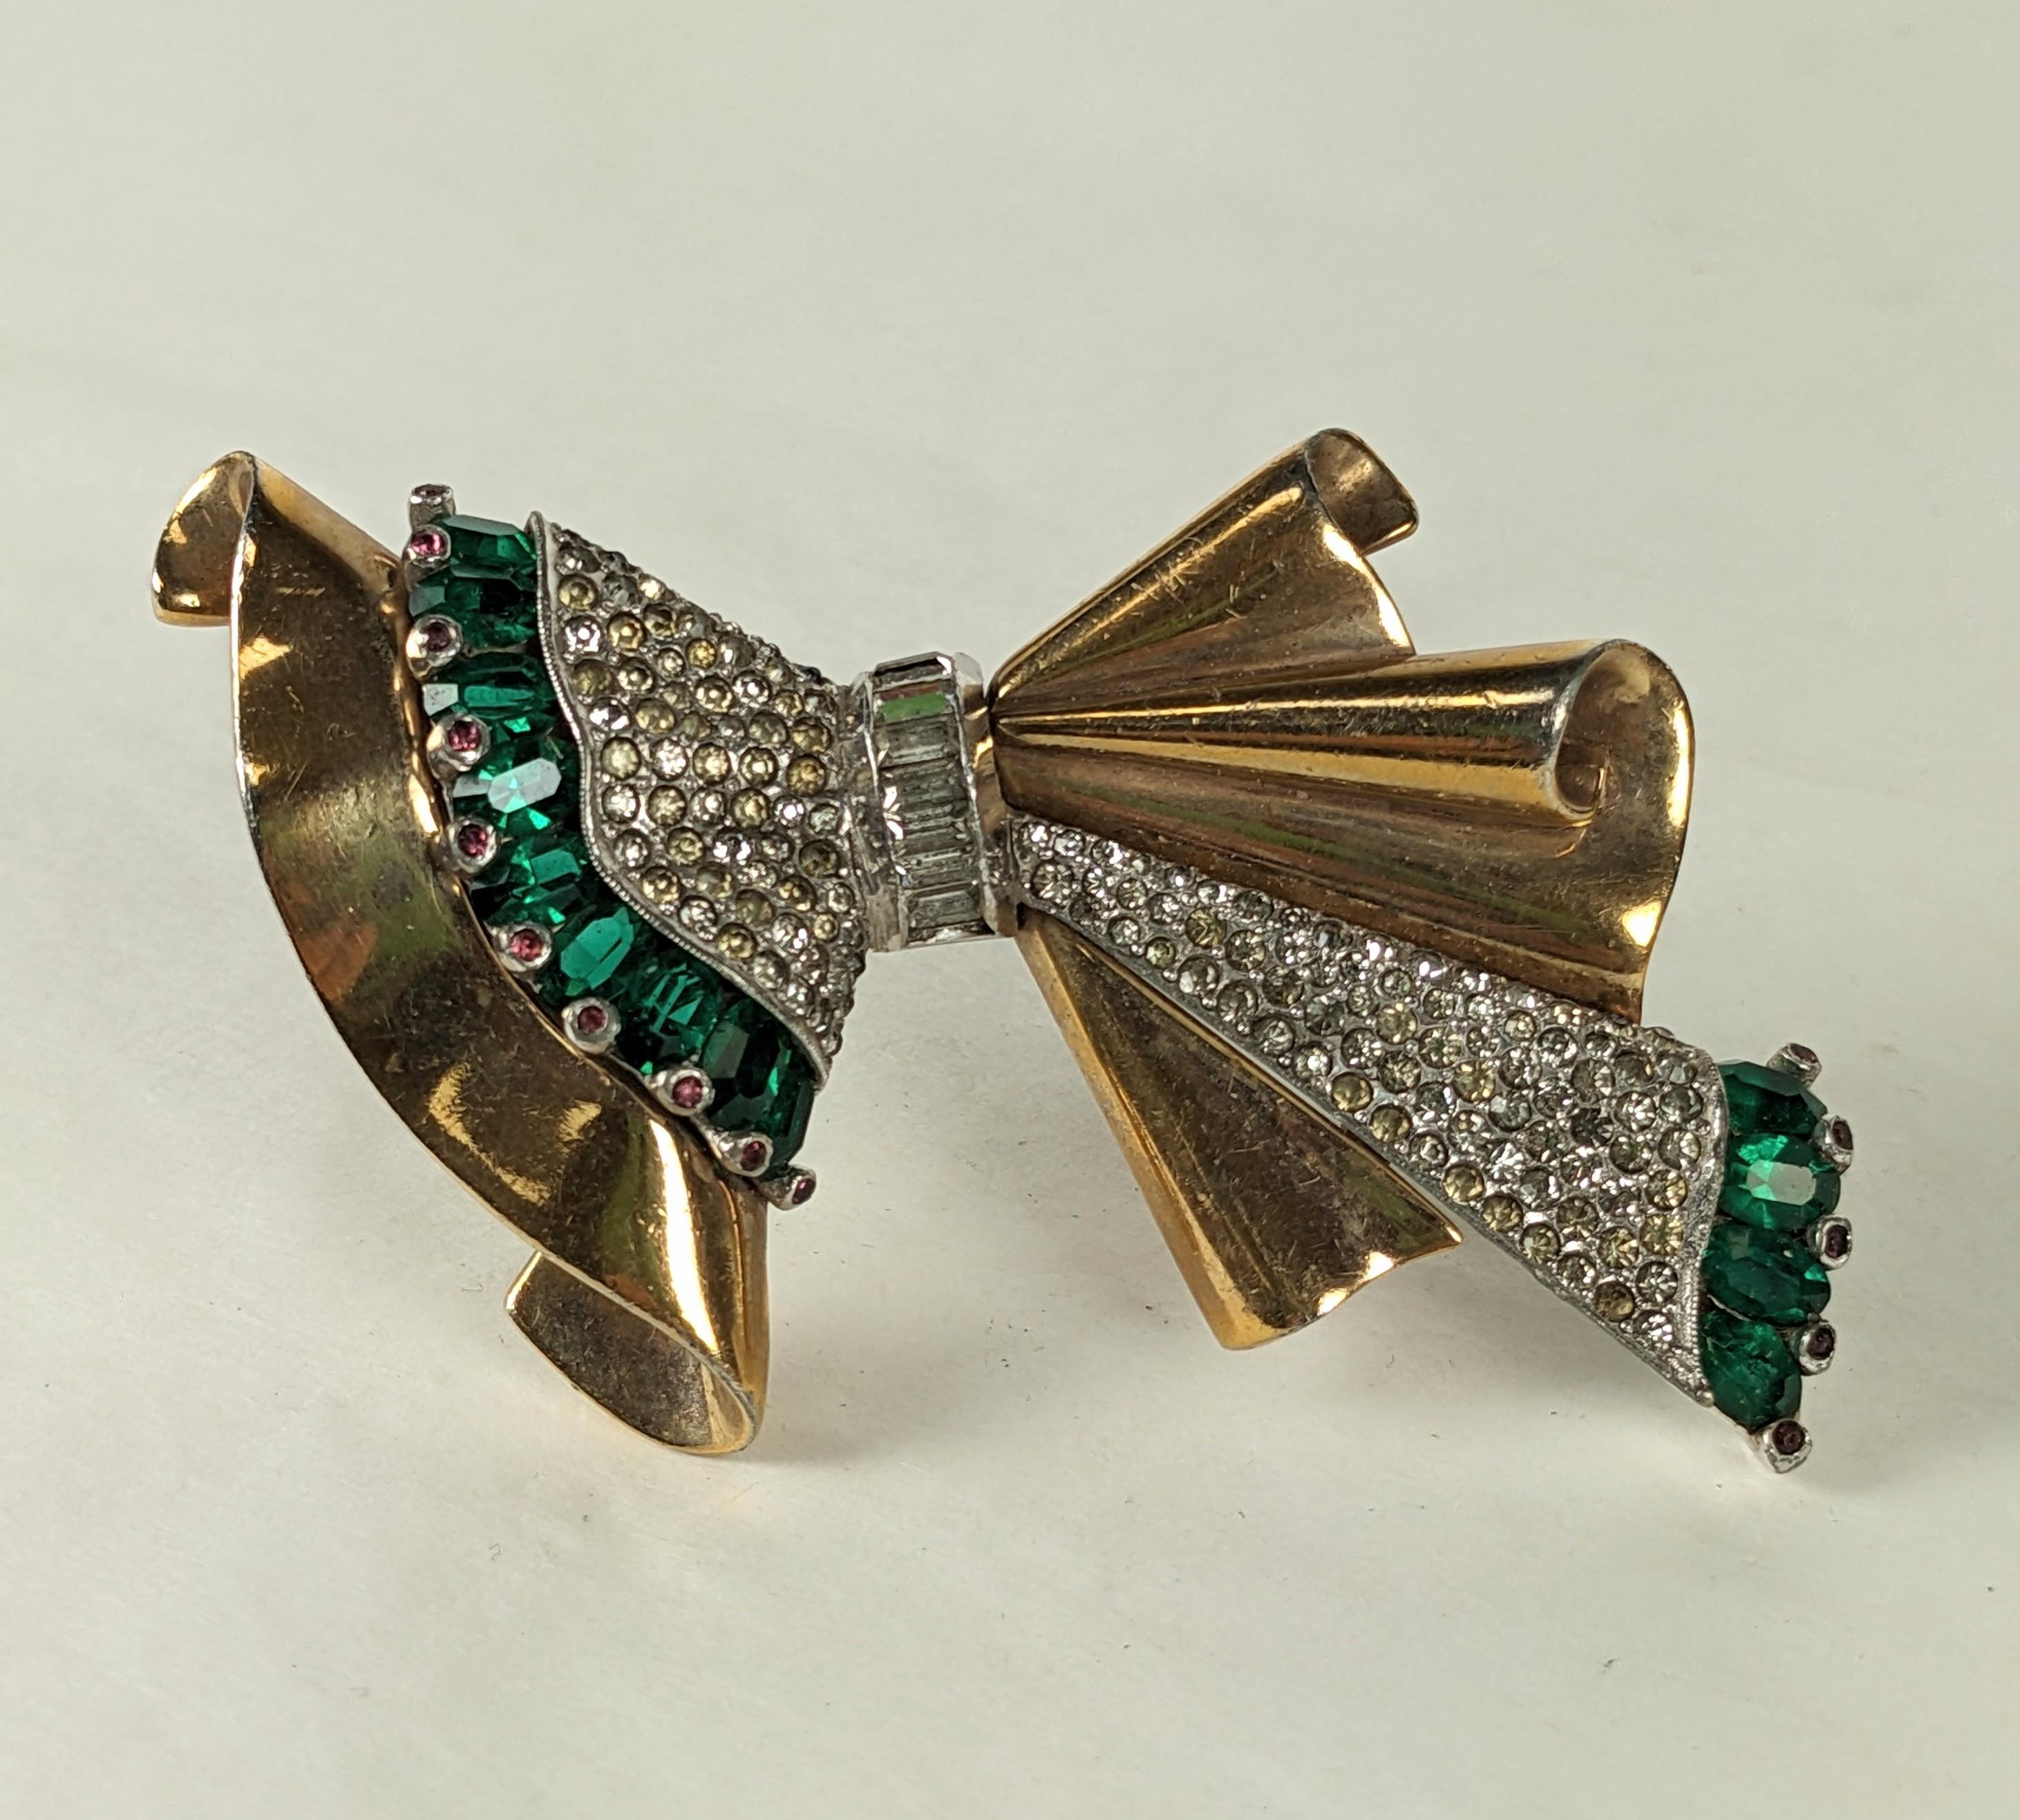 Amazing Pennino Retro Gathered Bow Brooch from the 1940's. Pink gold retro fan is paired with a rhodium and pave element edged in oval cut faux emeralds and tiny ruby cabs. 3.25